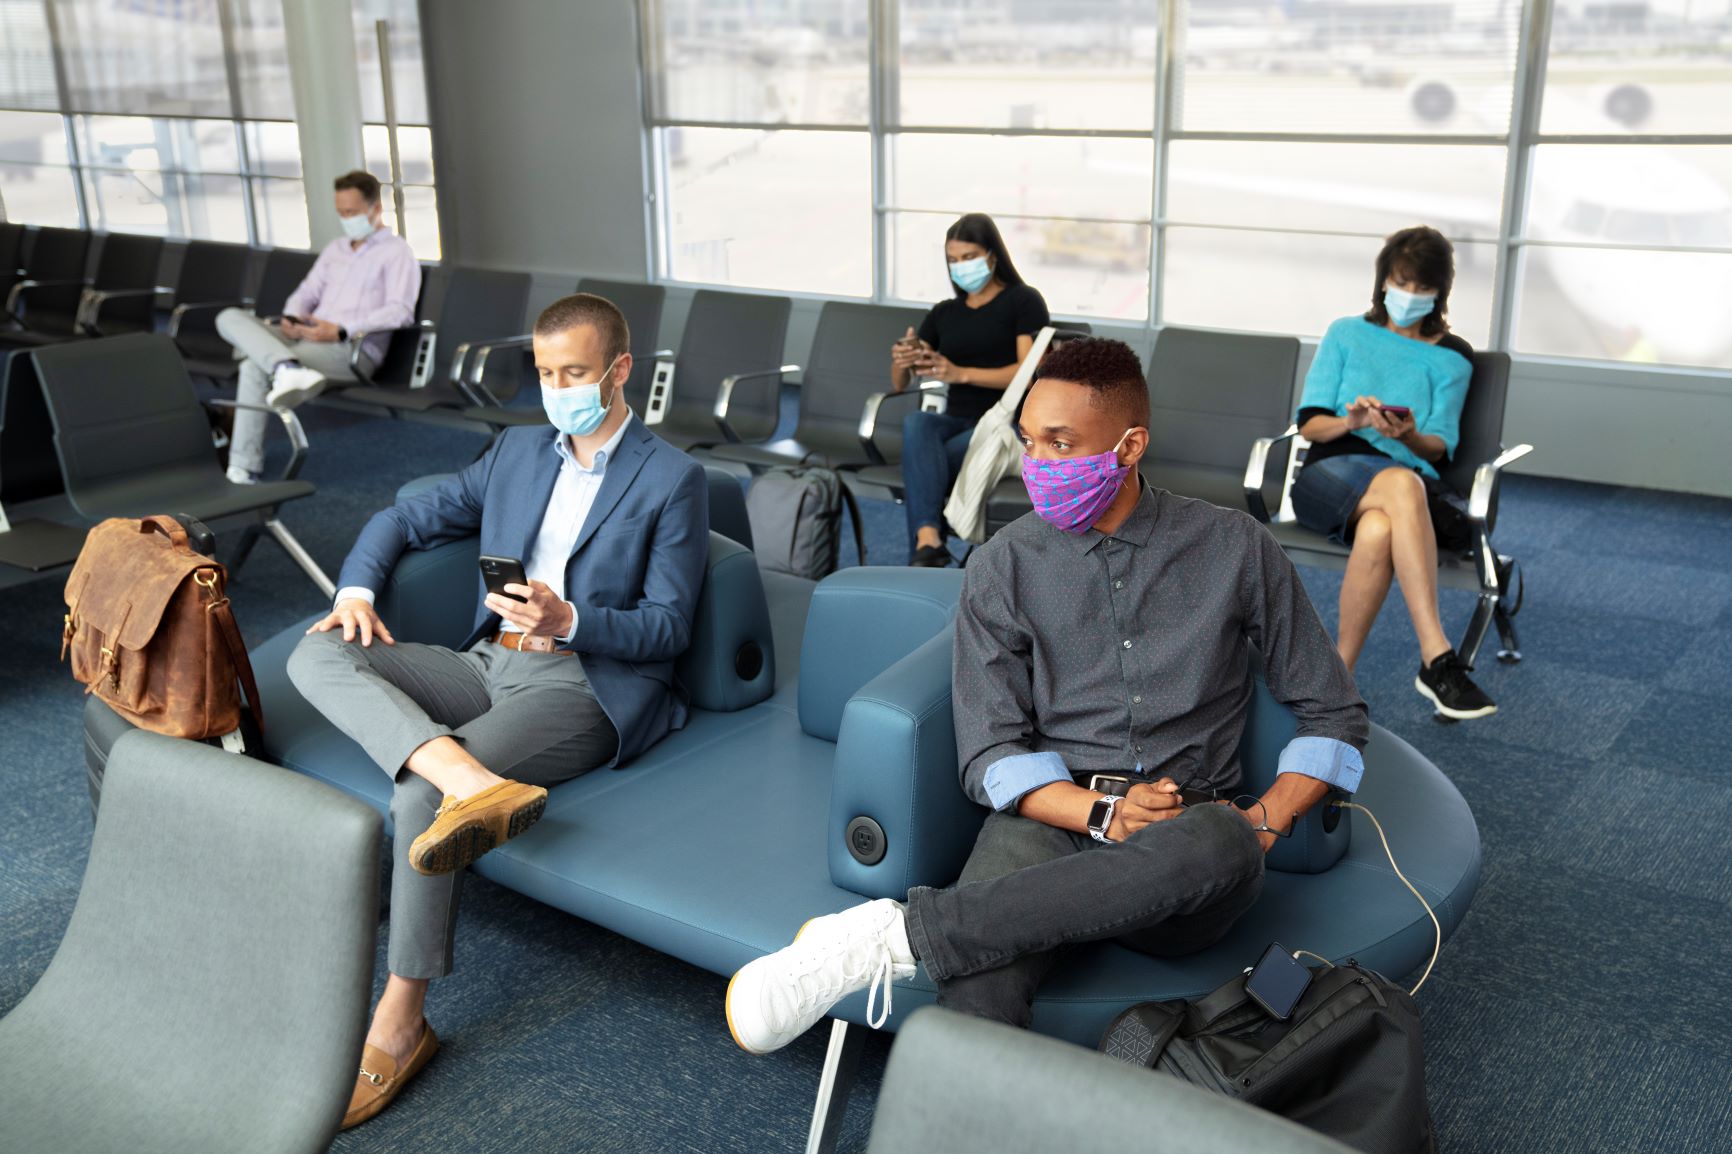 Passengers waiting to board their flights must wear a mask.  